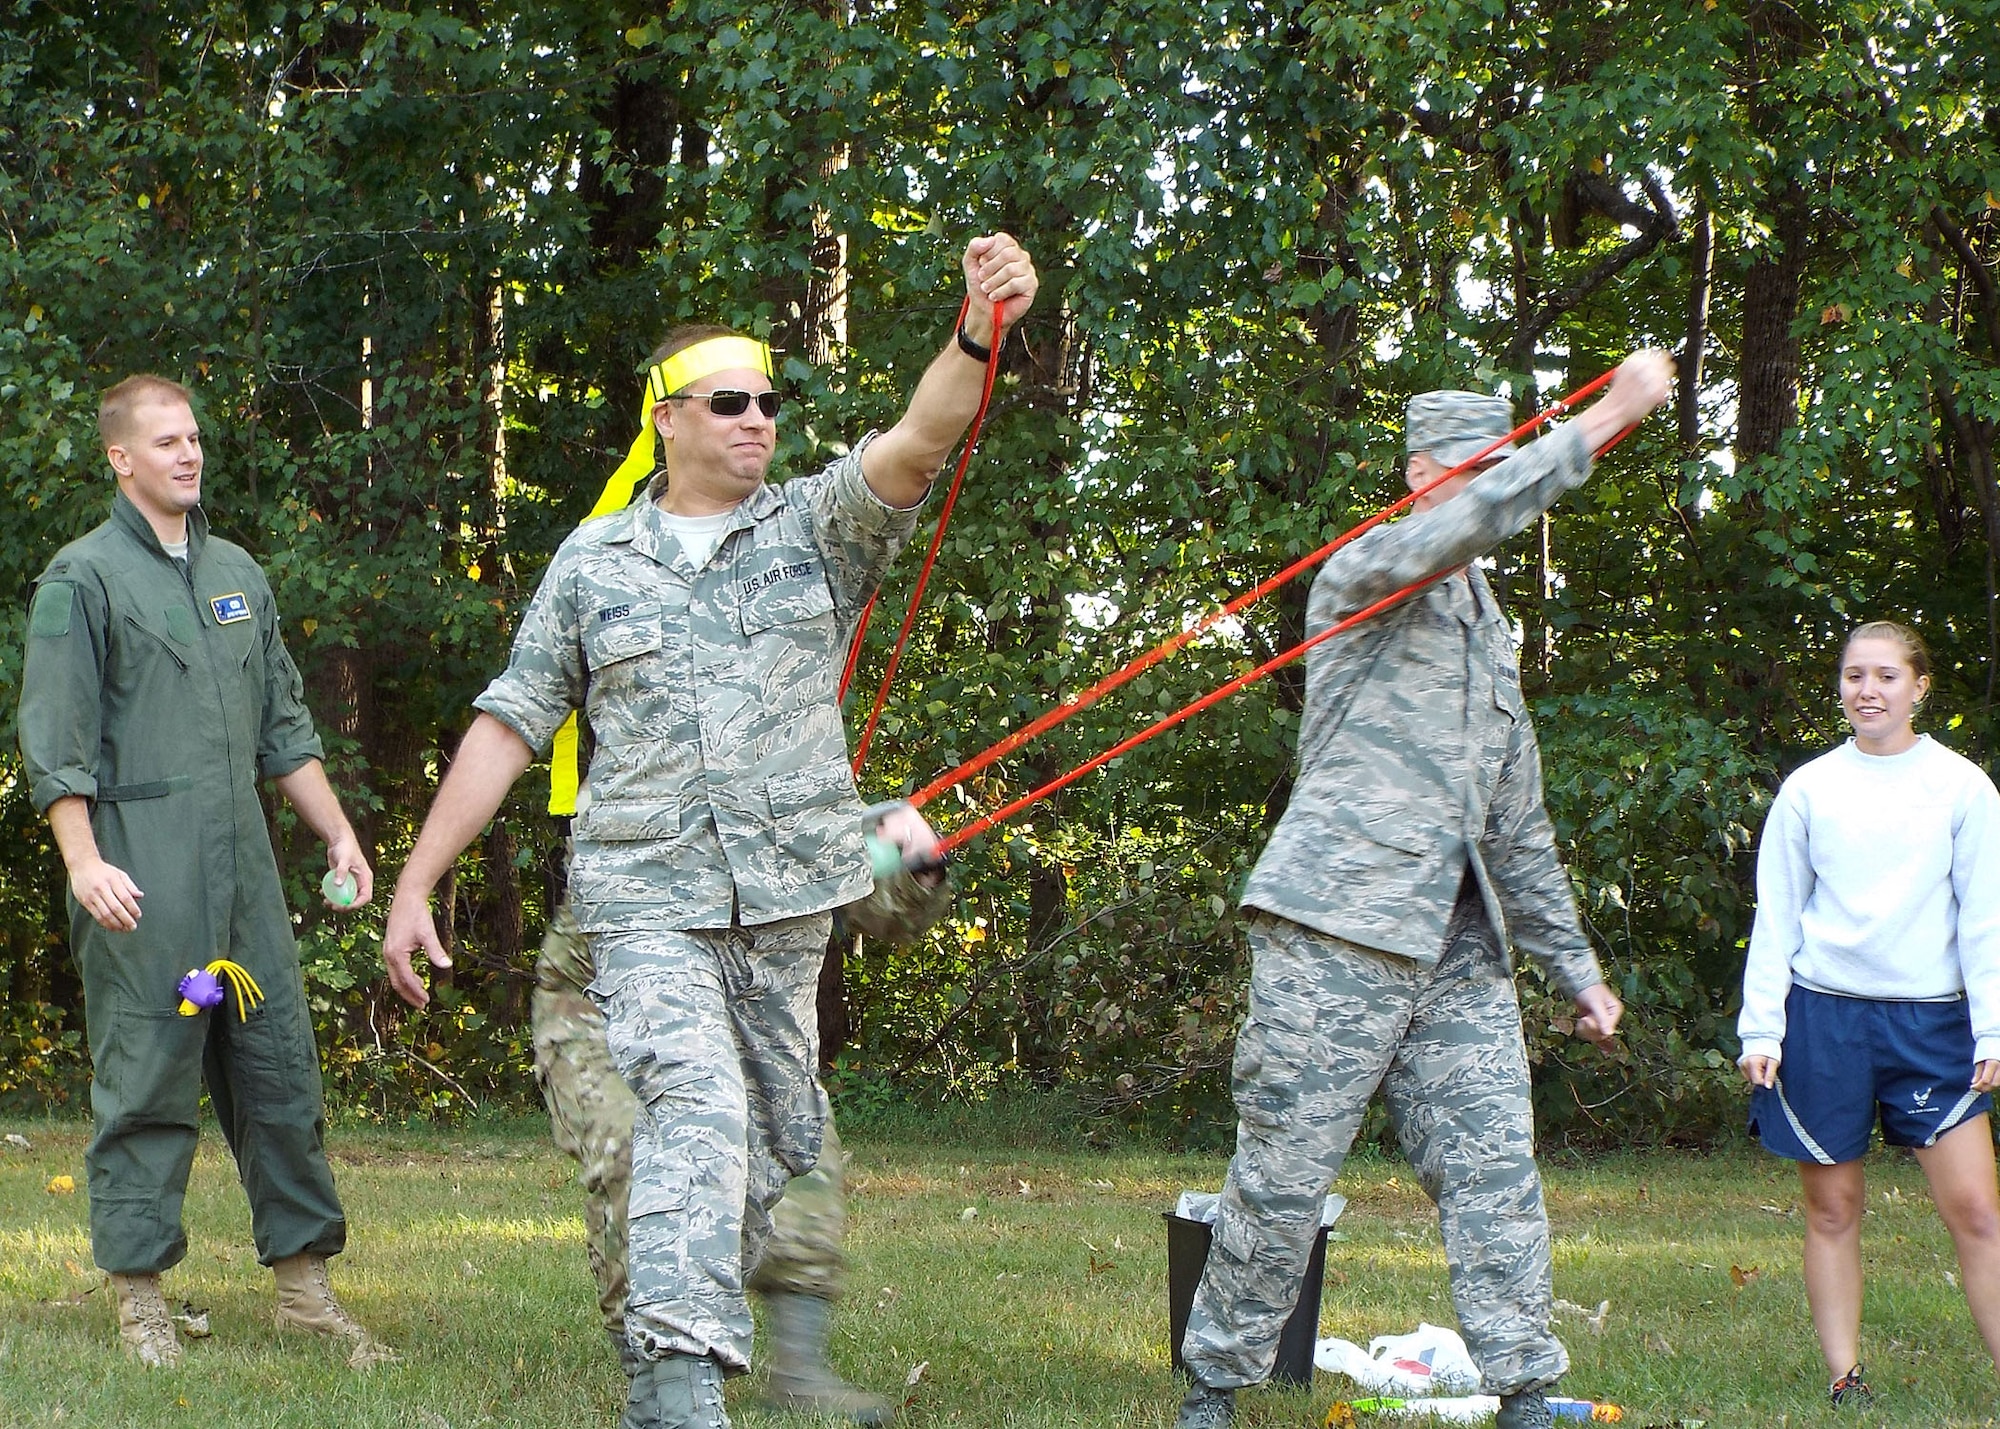 Members of the 80th Aerial Port Squadron participate in a water balloon toss at their unit combat dining in Oct. 4, 2014, at Dobbins Air Reserve Base, Ga. The celebration allows Airmen of all ranks to come together and celebrate unit and individual accomplishments. (U.S. Air Force photo by Staff Sgt. Karla Lehman/Released)